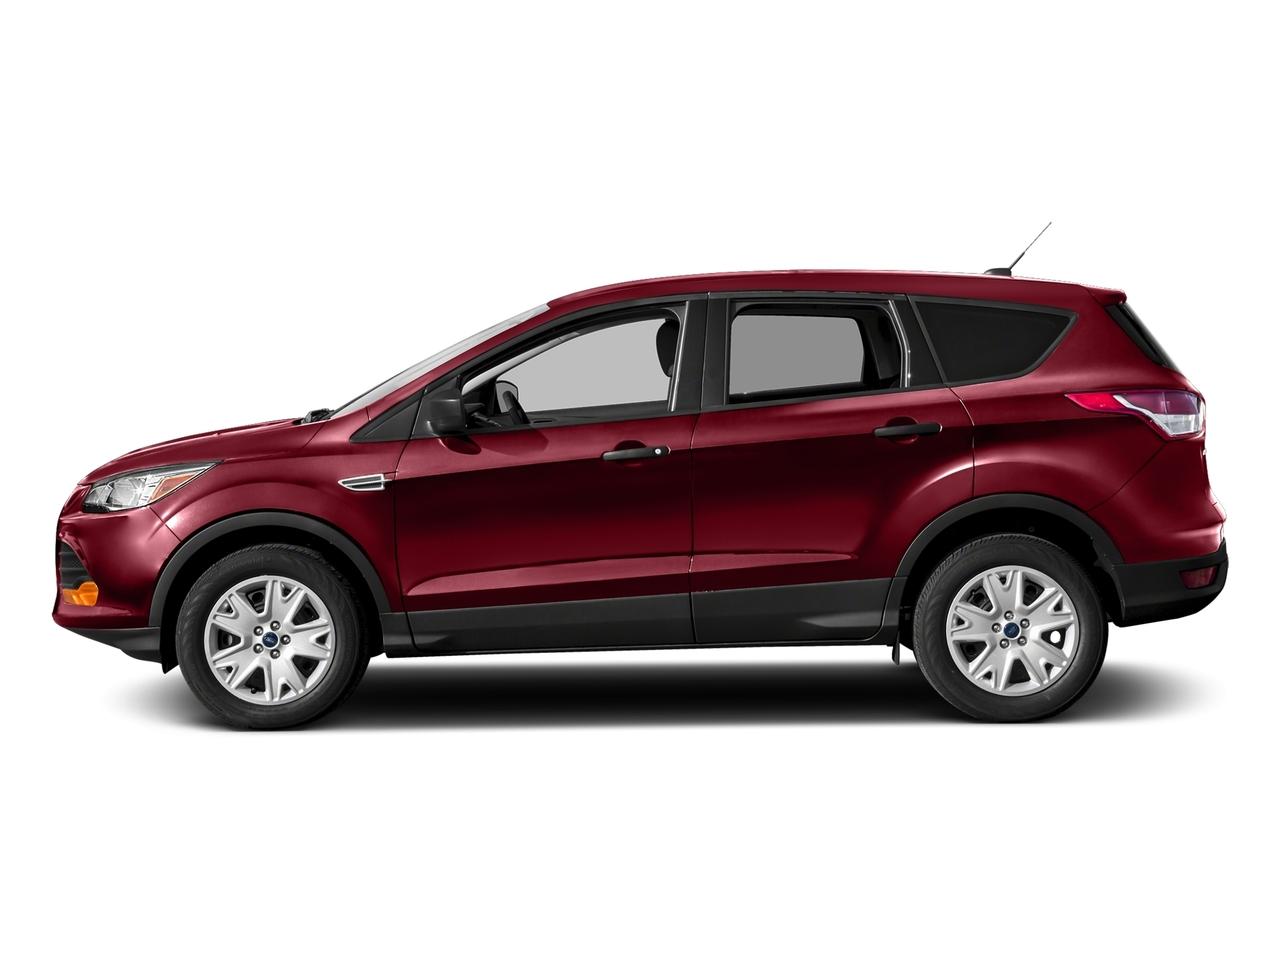 Used 2016 Ford Escape SE with VIN 1FMCU9G97GUA76081 for sale in Pine River, Minnesota